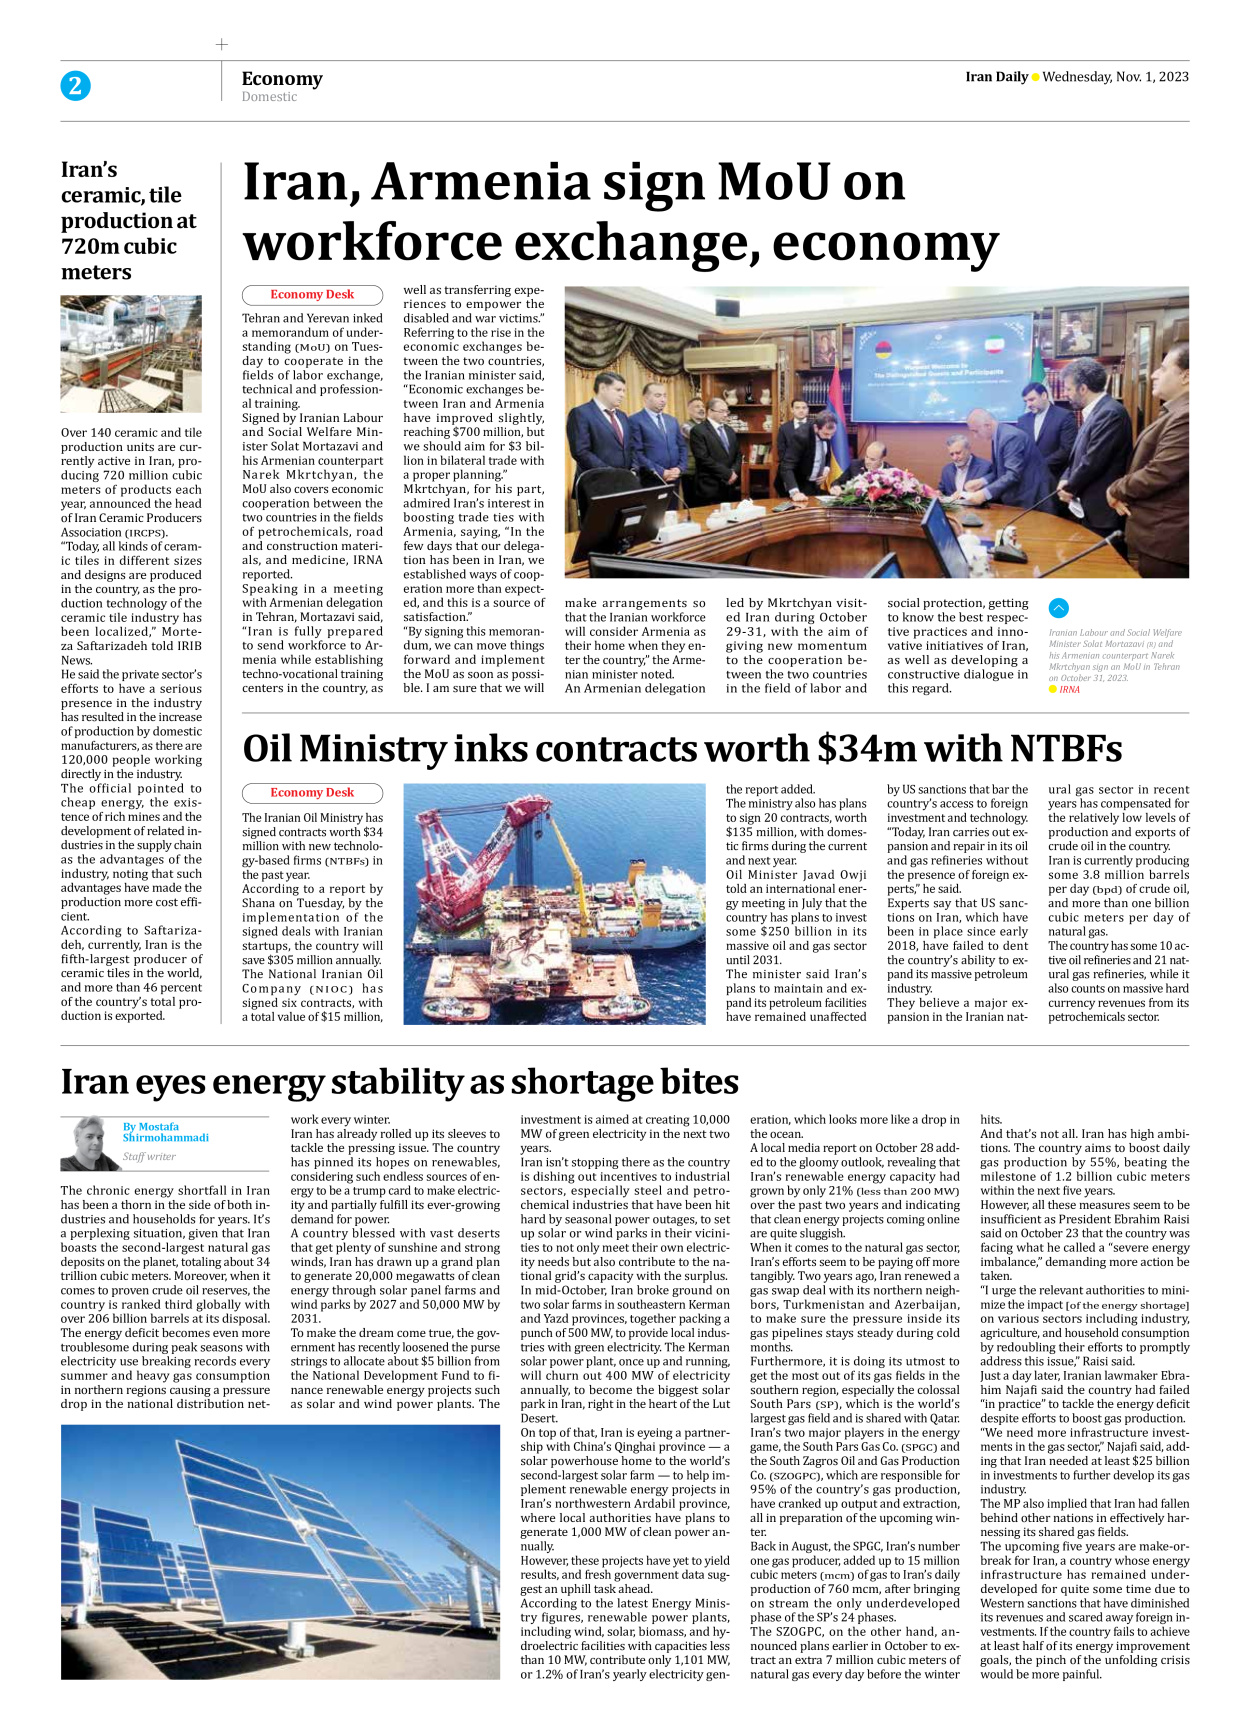 Iran Daily - Number Seven Thousand Four Hundred and Twenty Three - 01 November 2023 - Page 2